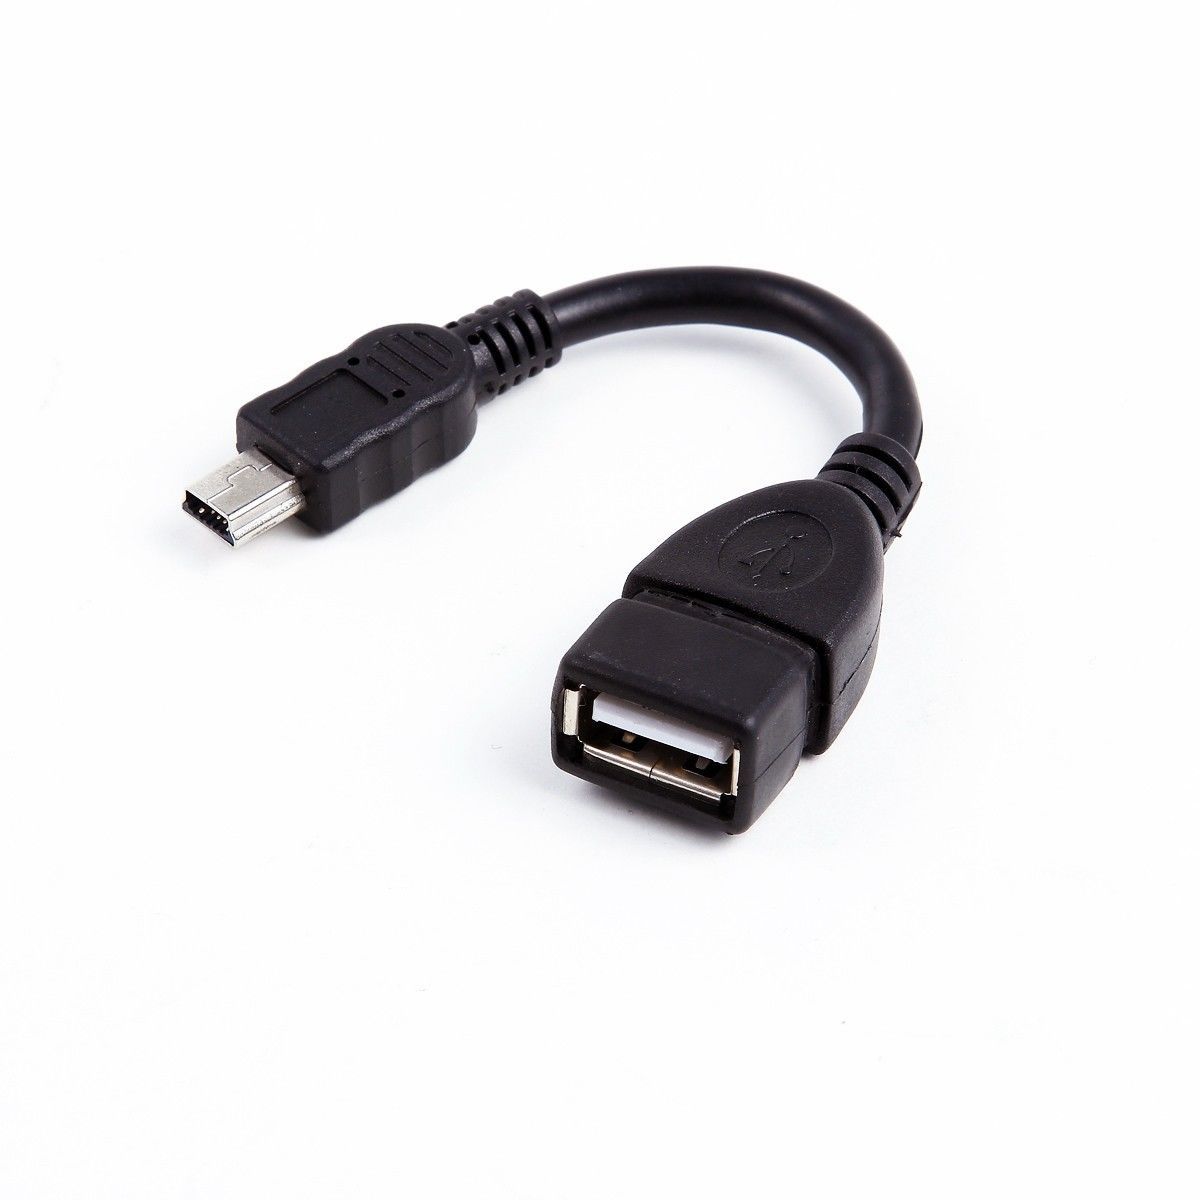 Sony VMCUAM1 USB Adapter Cable 